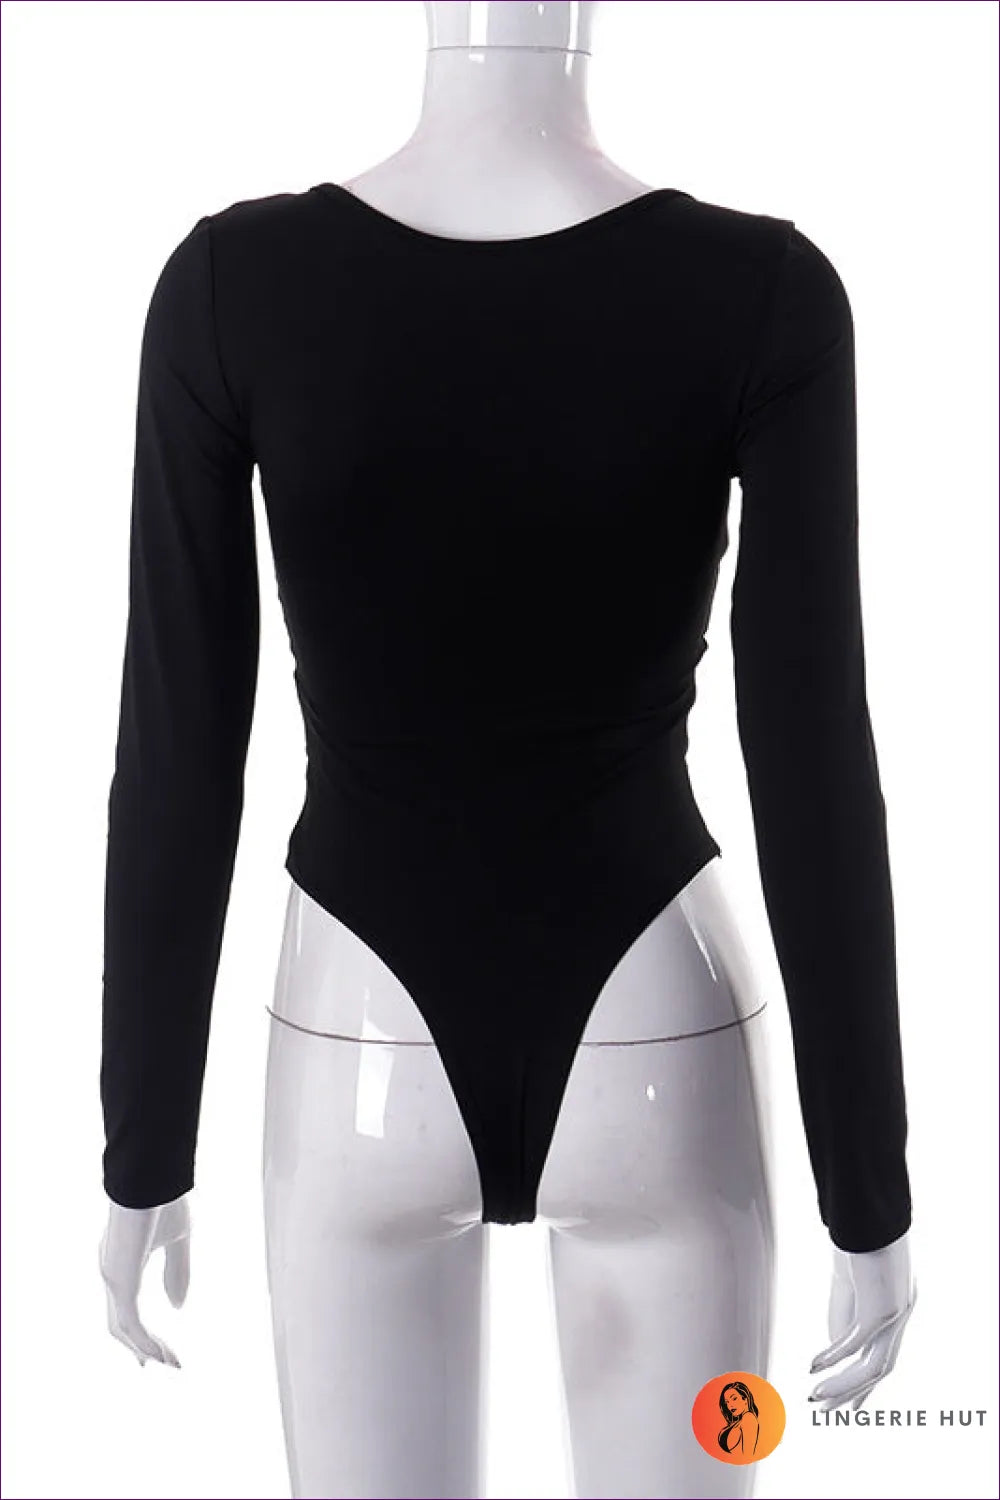 Make a Statement With Our Ring Detail Cut Out Long Sleeve Thong Bodysuit. Crafted From Sheer Fabric, Featuring